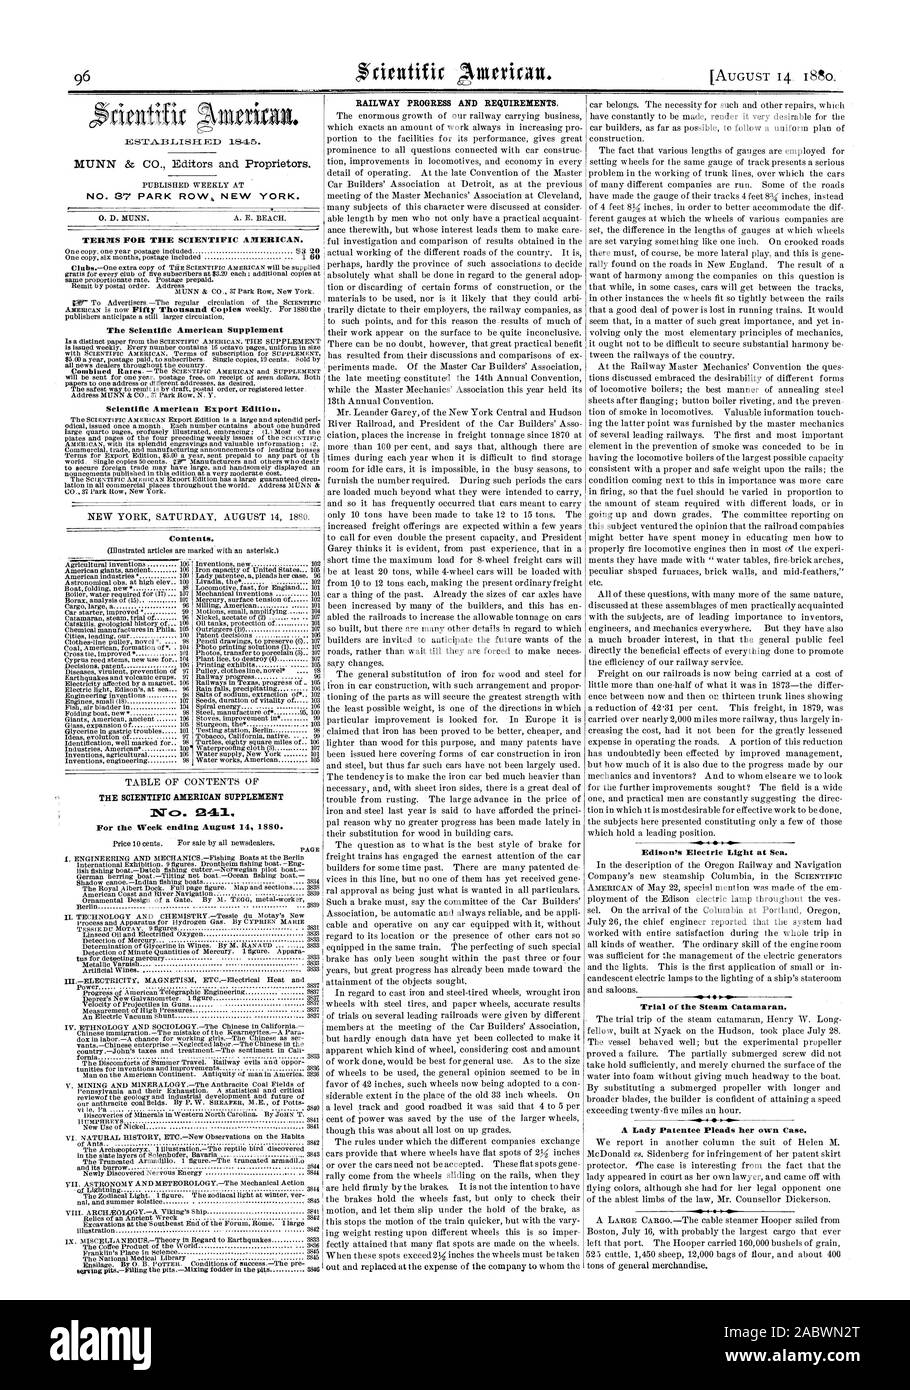 NScientific American Export Edition. RAILWAY PROGRESS AND REQUIREMENTS. Edison's Electric Light at Sea. Trial of the Steam Catamaran. A Lady Patentee Pleads her own Case. Contents. THE SCIENTIFIC AMERICAN SUPPLEMENT 1Vo. 041. For the Week ending August 14 1880., 1880-08-14 Stock Photo